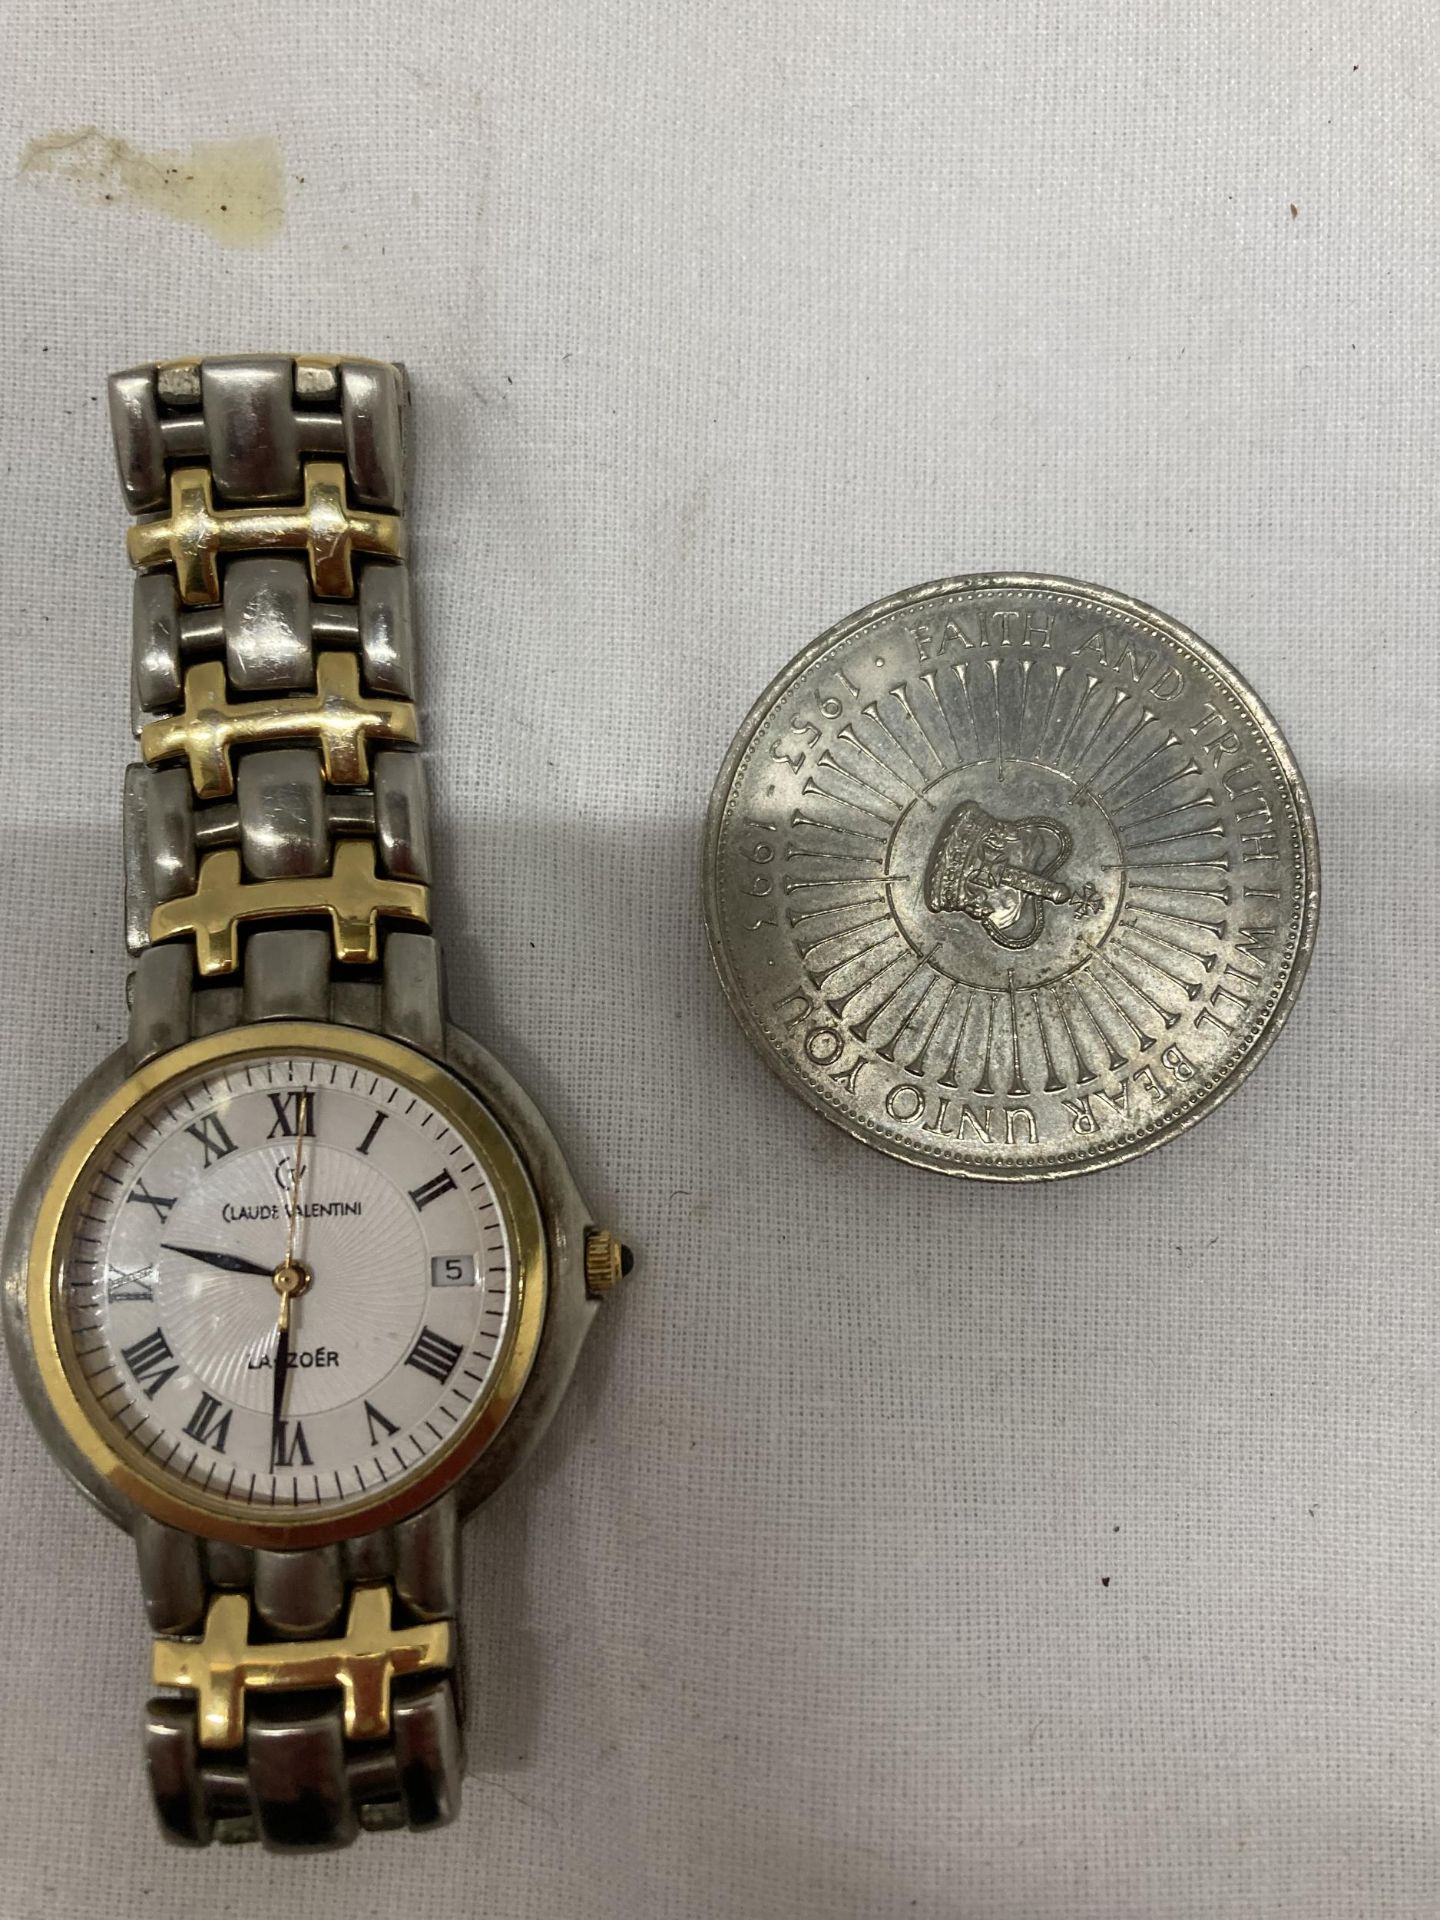 A CLAUDE VALENTINI BI METAL WATCH AND COMMEMORATIVE COIN - Image 2 of 3